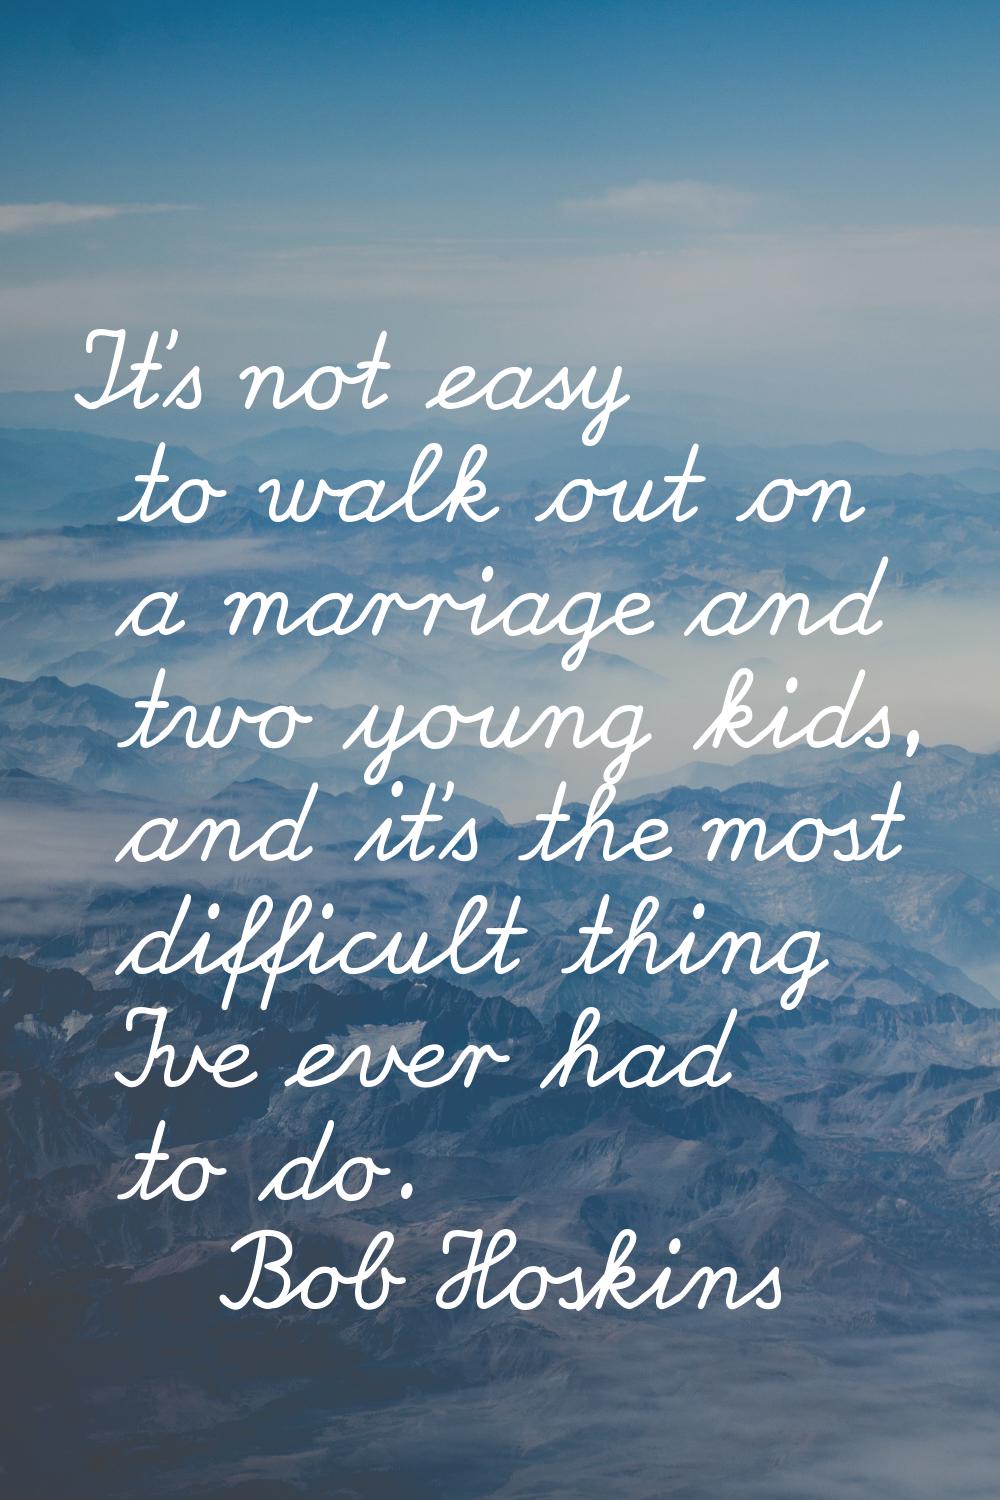 It's not easy to walk out on a marriage and two young kids, and it's the most difficult thing I've 